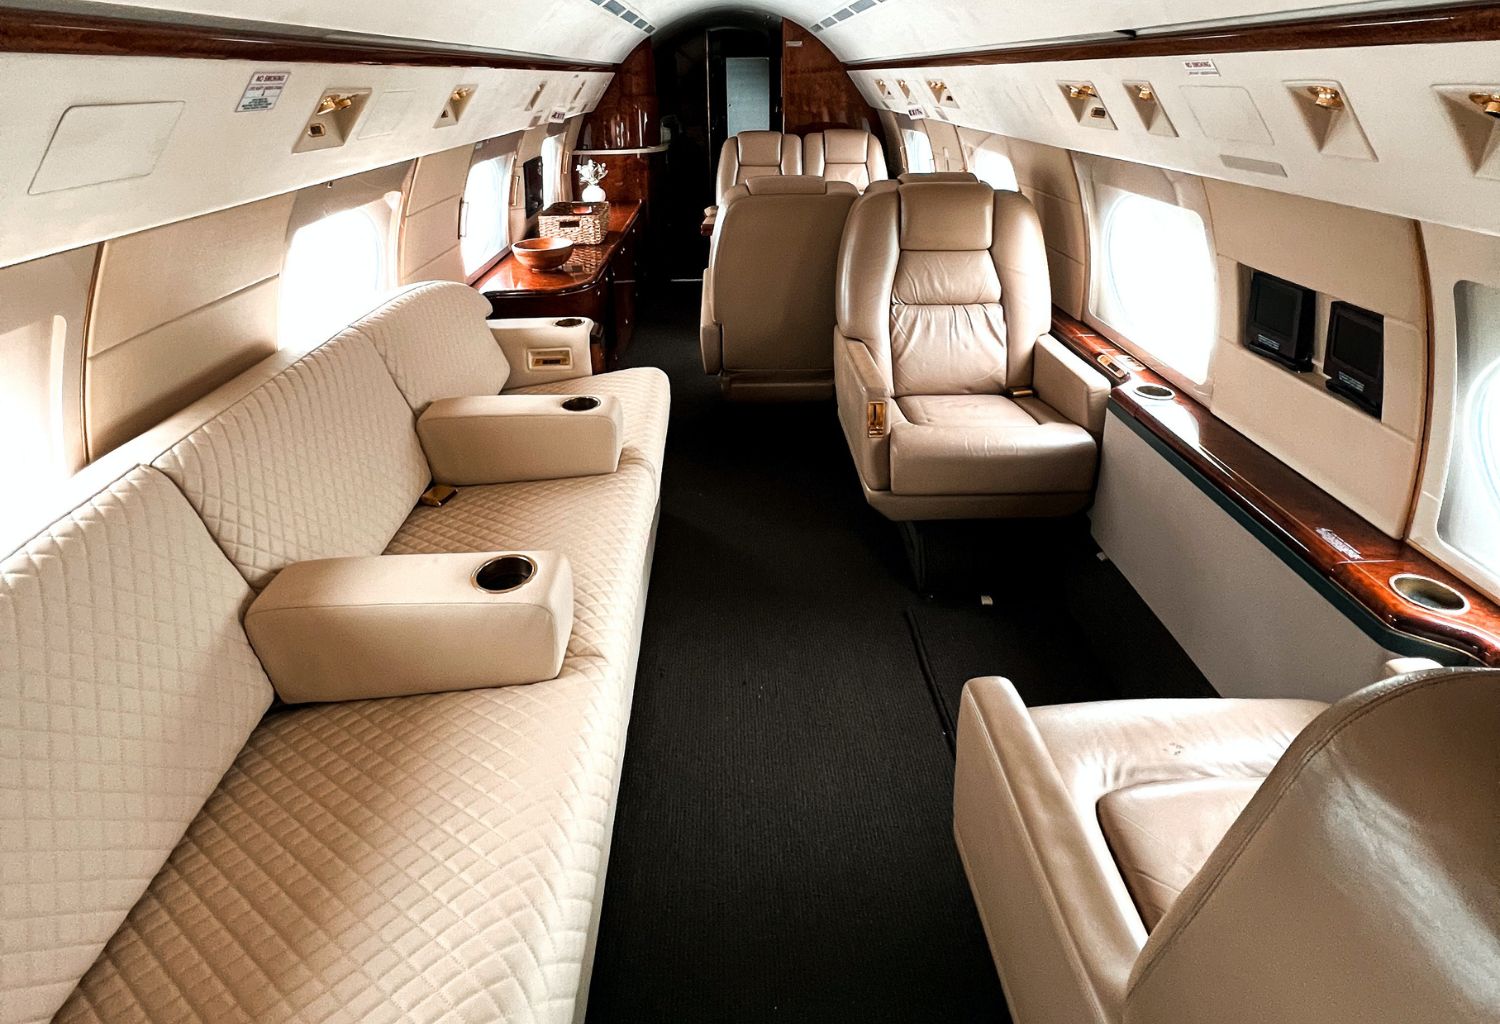 What Are the Best Luxury Amenities on Private Jets